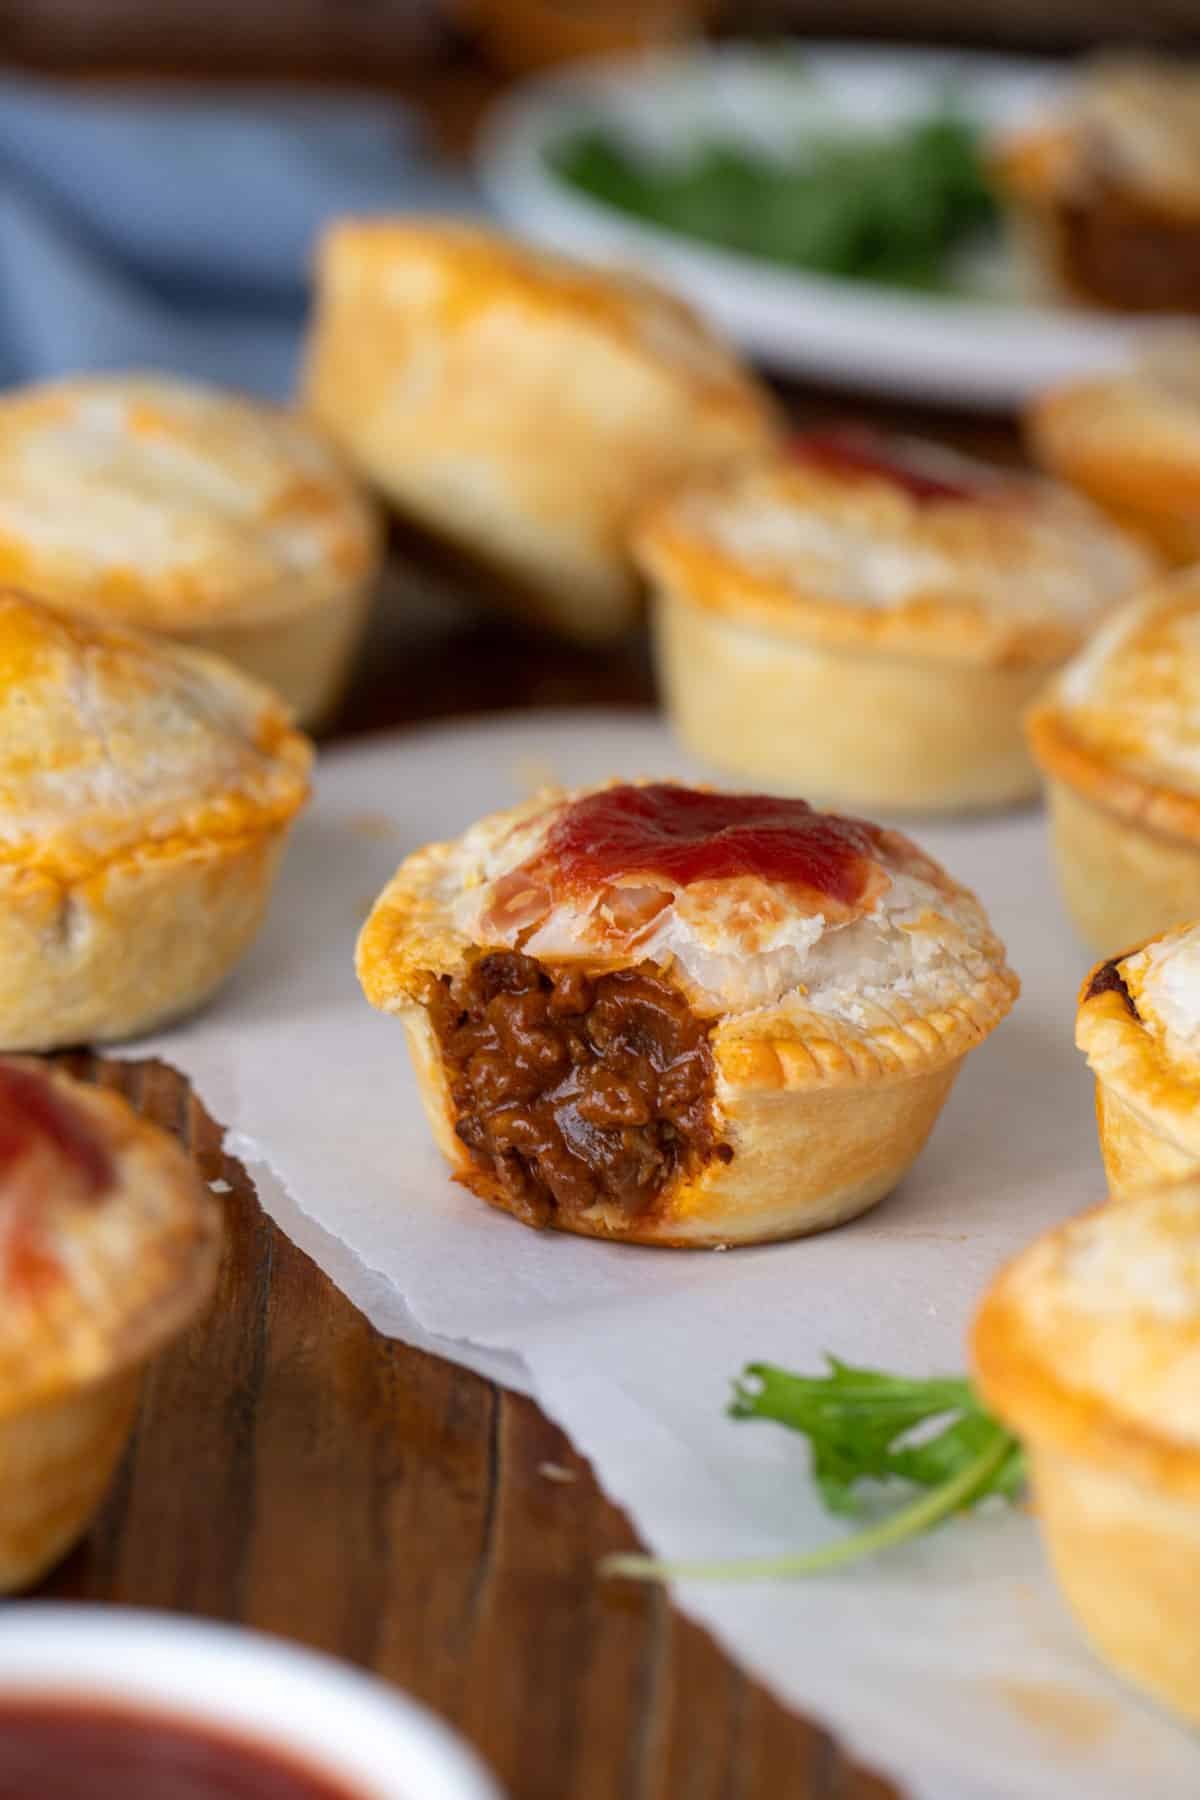 mini pies arranged on a table, topped with tomato sauce.